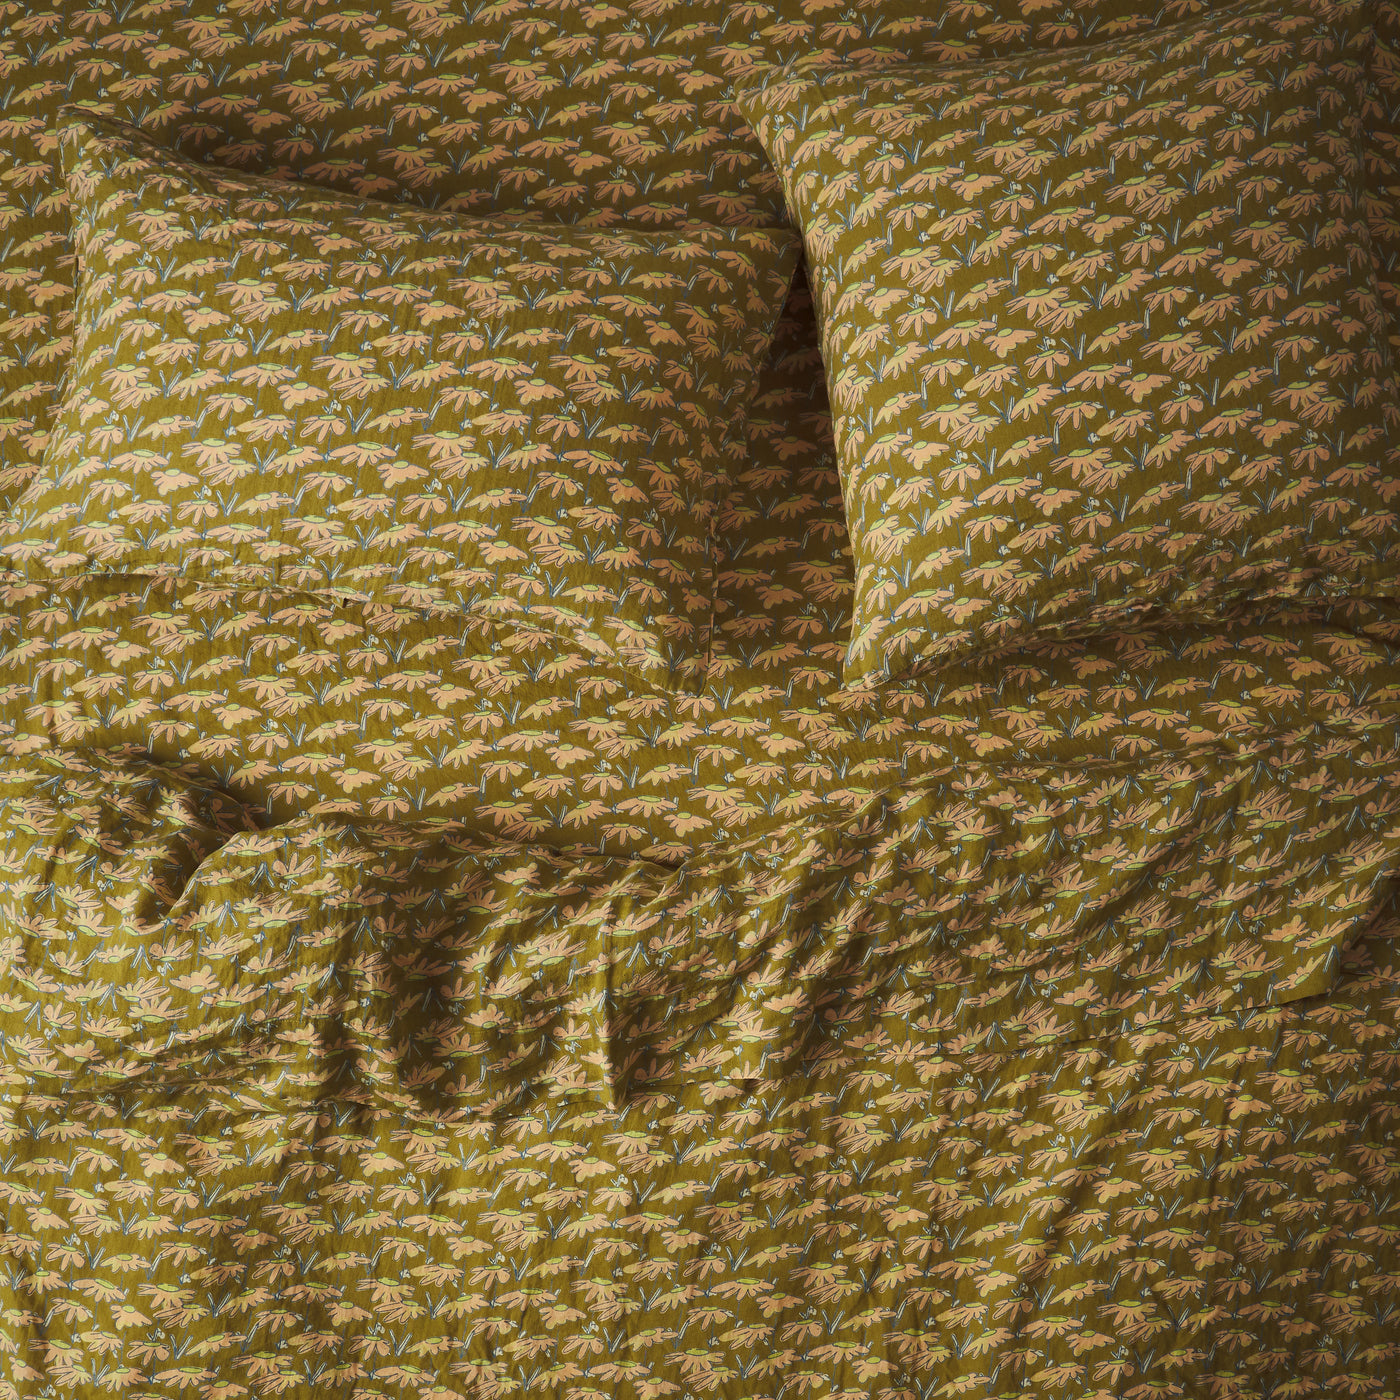 Hayle Linen Fitted Sheet - Olive Cot